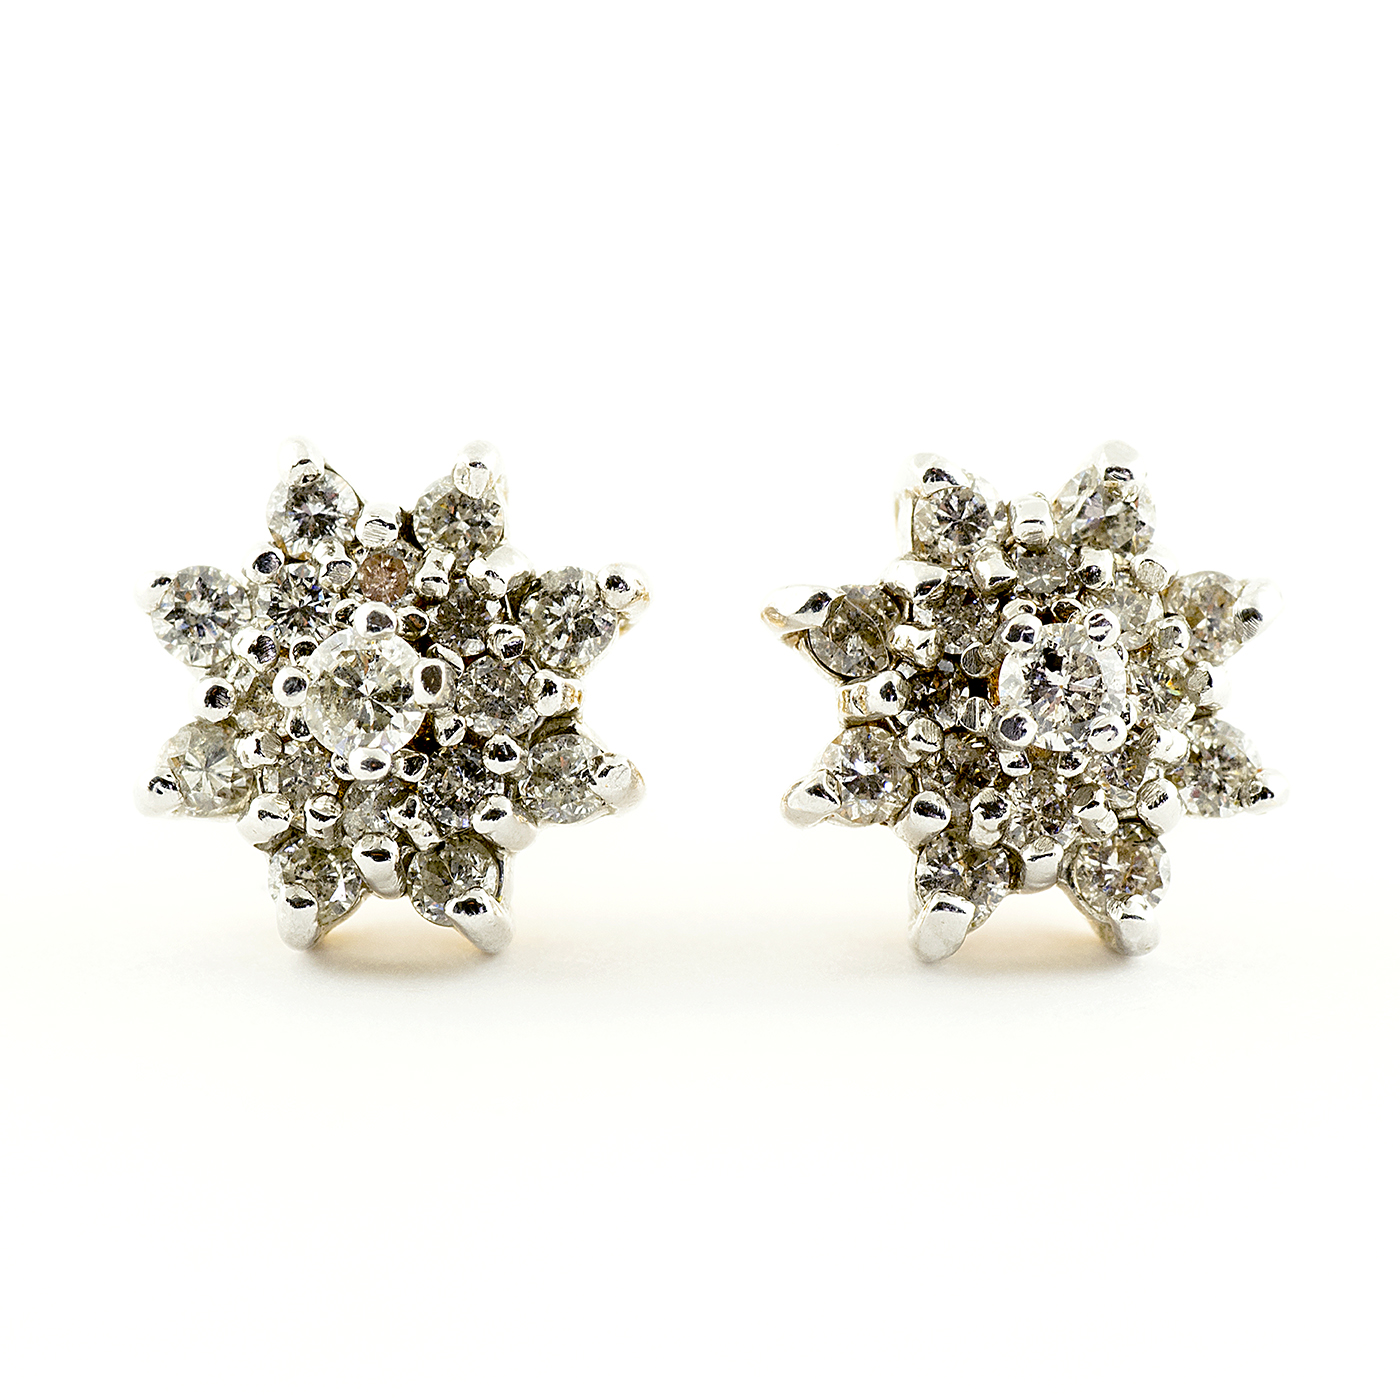 Set of earrings in 18k white gold, with 17 Natural Diamonds, 1,5 ct Brilliant cut.